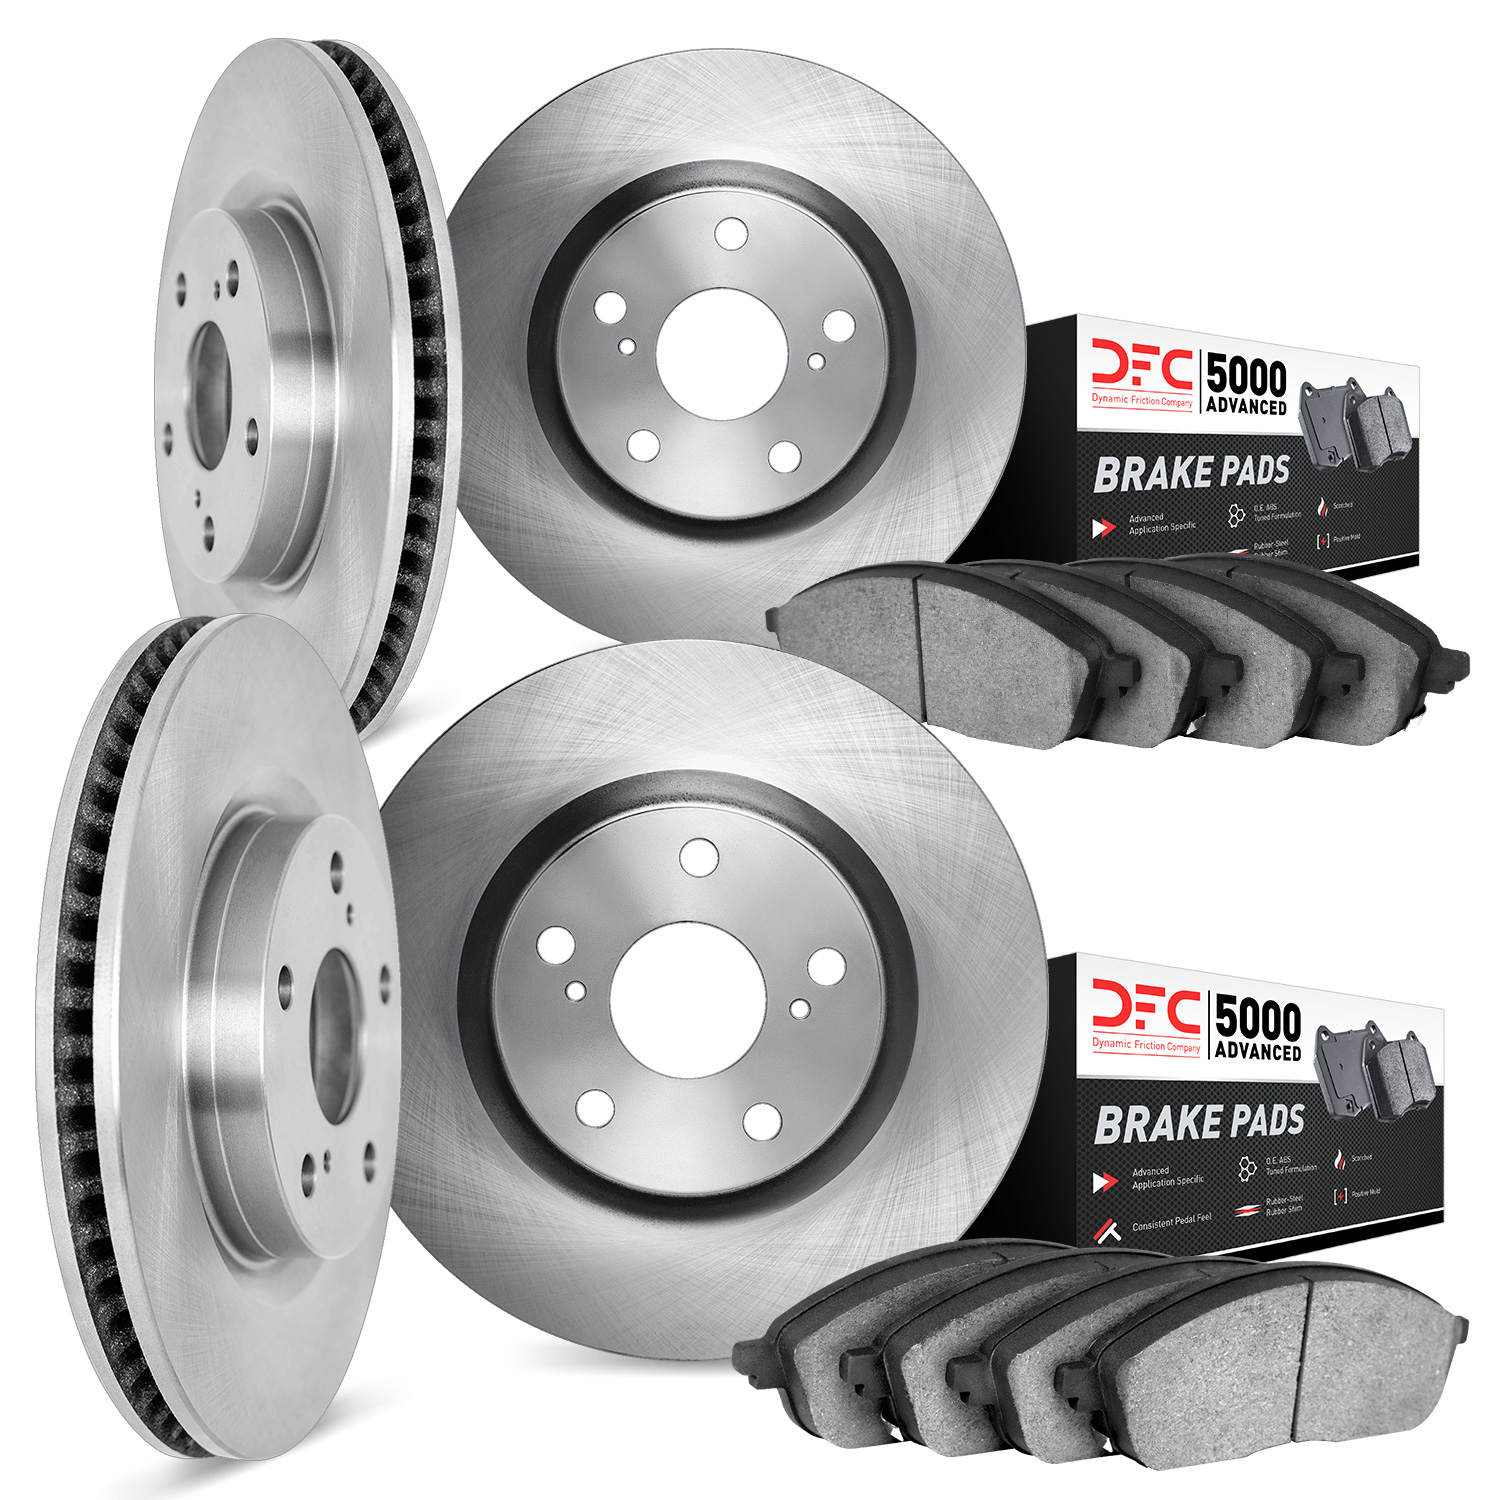 6504-65000 Brake Rotors w/5000 Advanced Brake Pads Kit, 2010-2017 GM, Position: Front and Rear